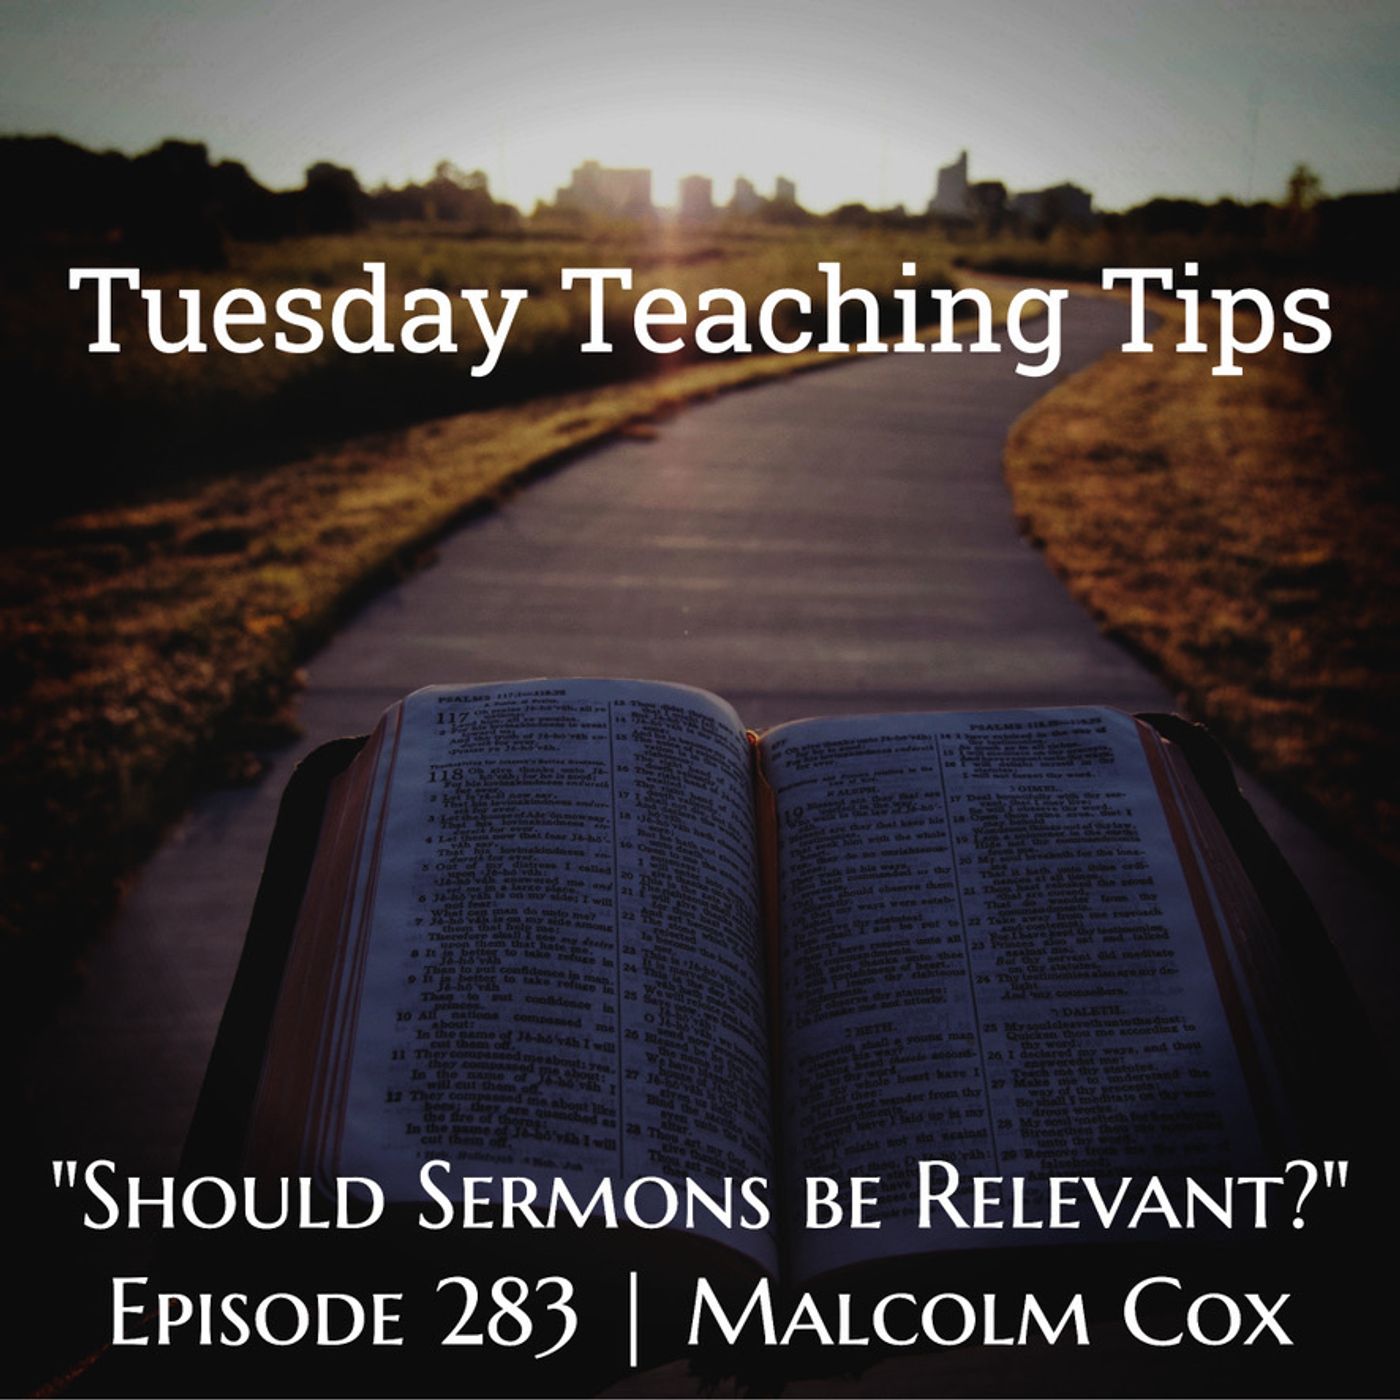 S2 Ep283: Tuesday Teaching Tips | Episode 283 | “Should Sermons be Relevant?”